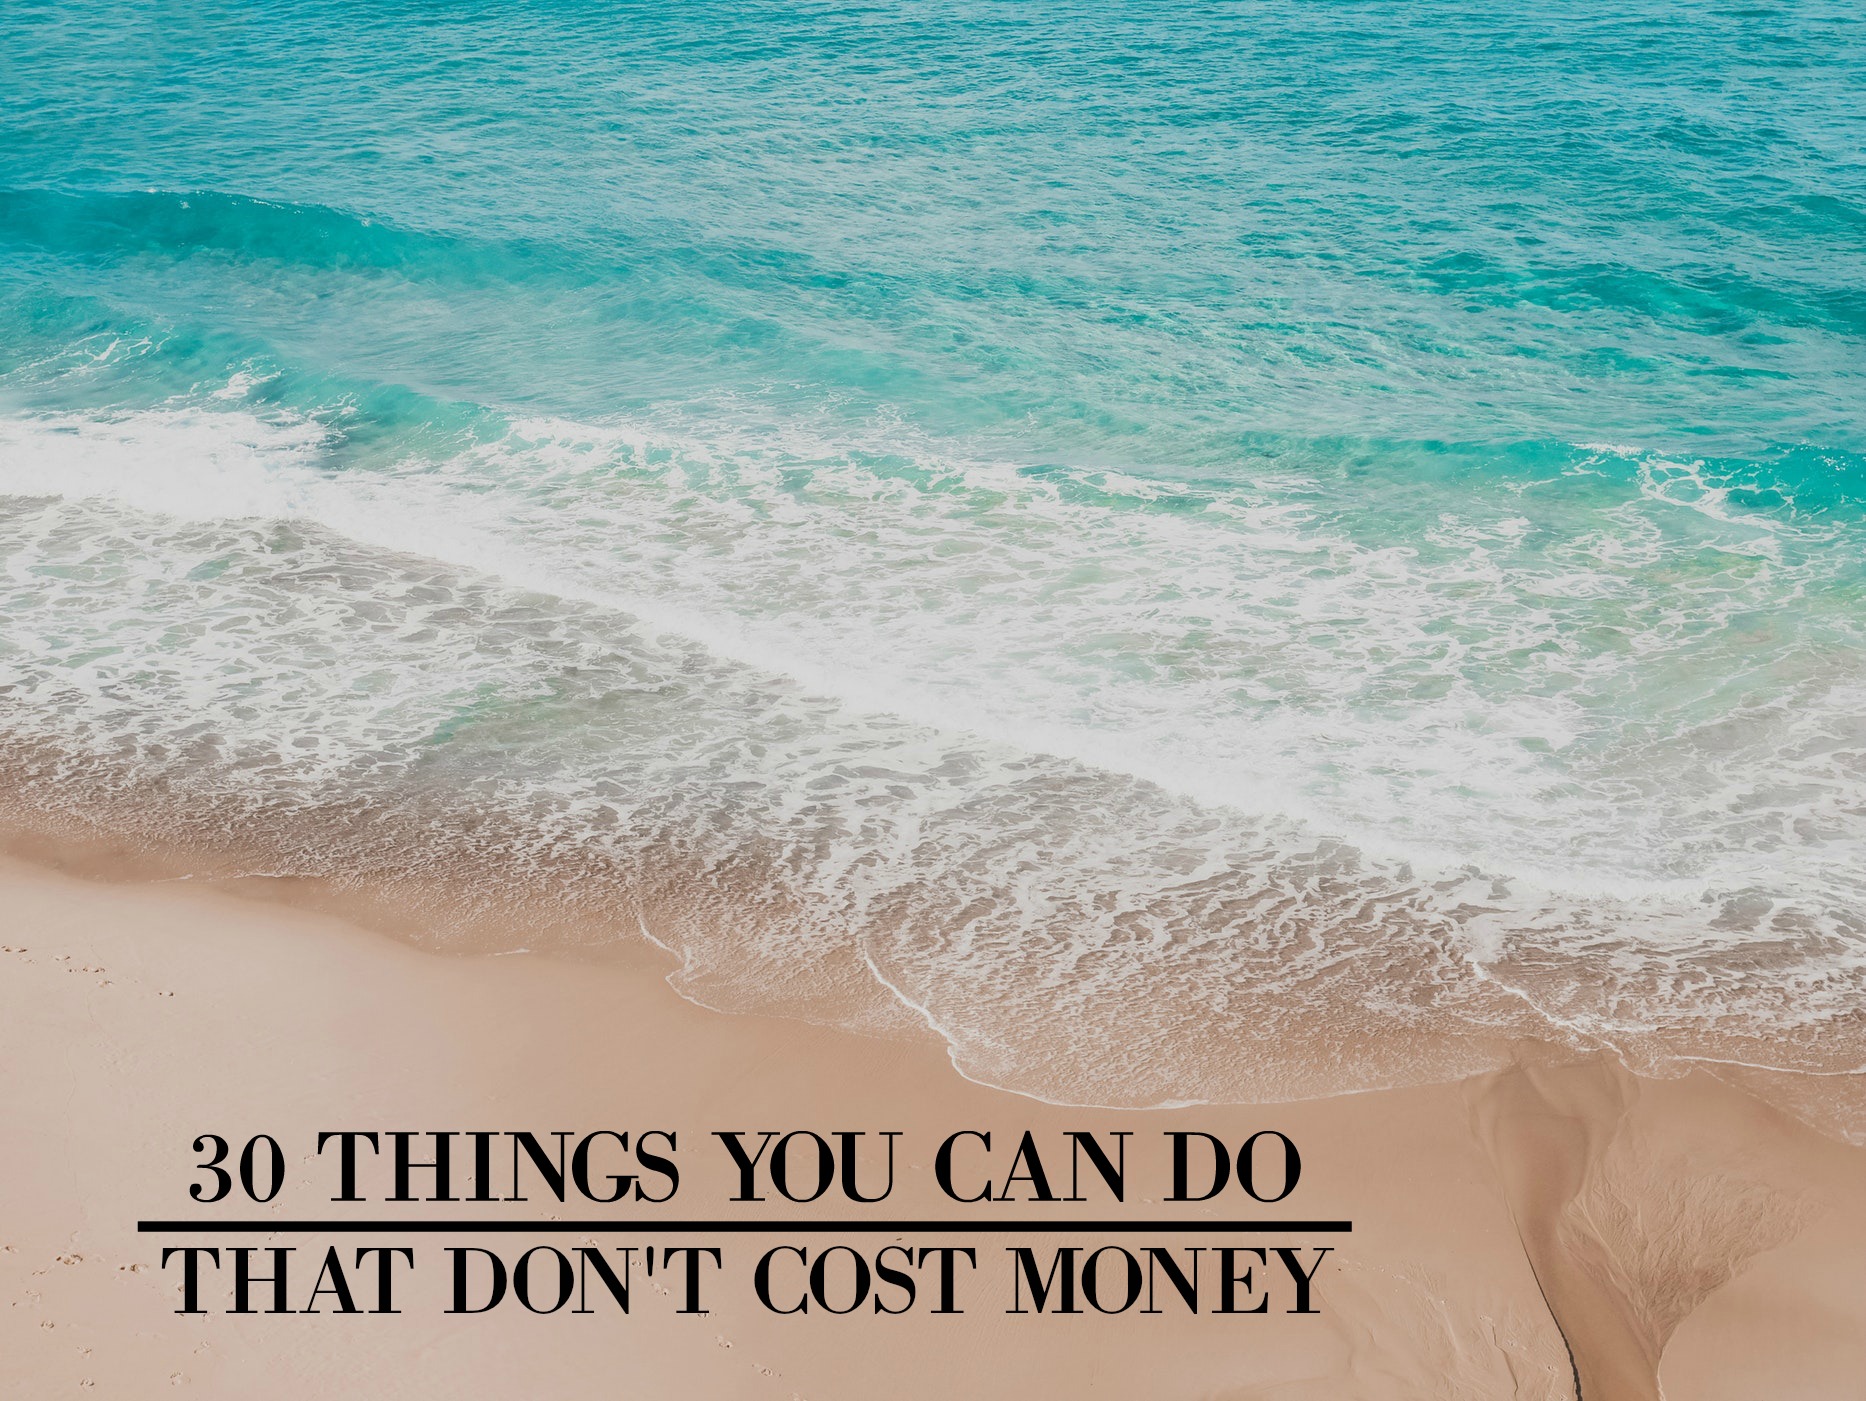 30-things-you-can-do-that-don-t-cost-money